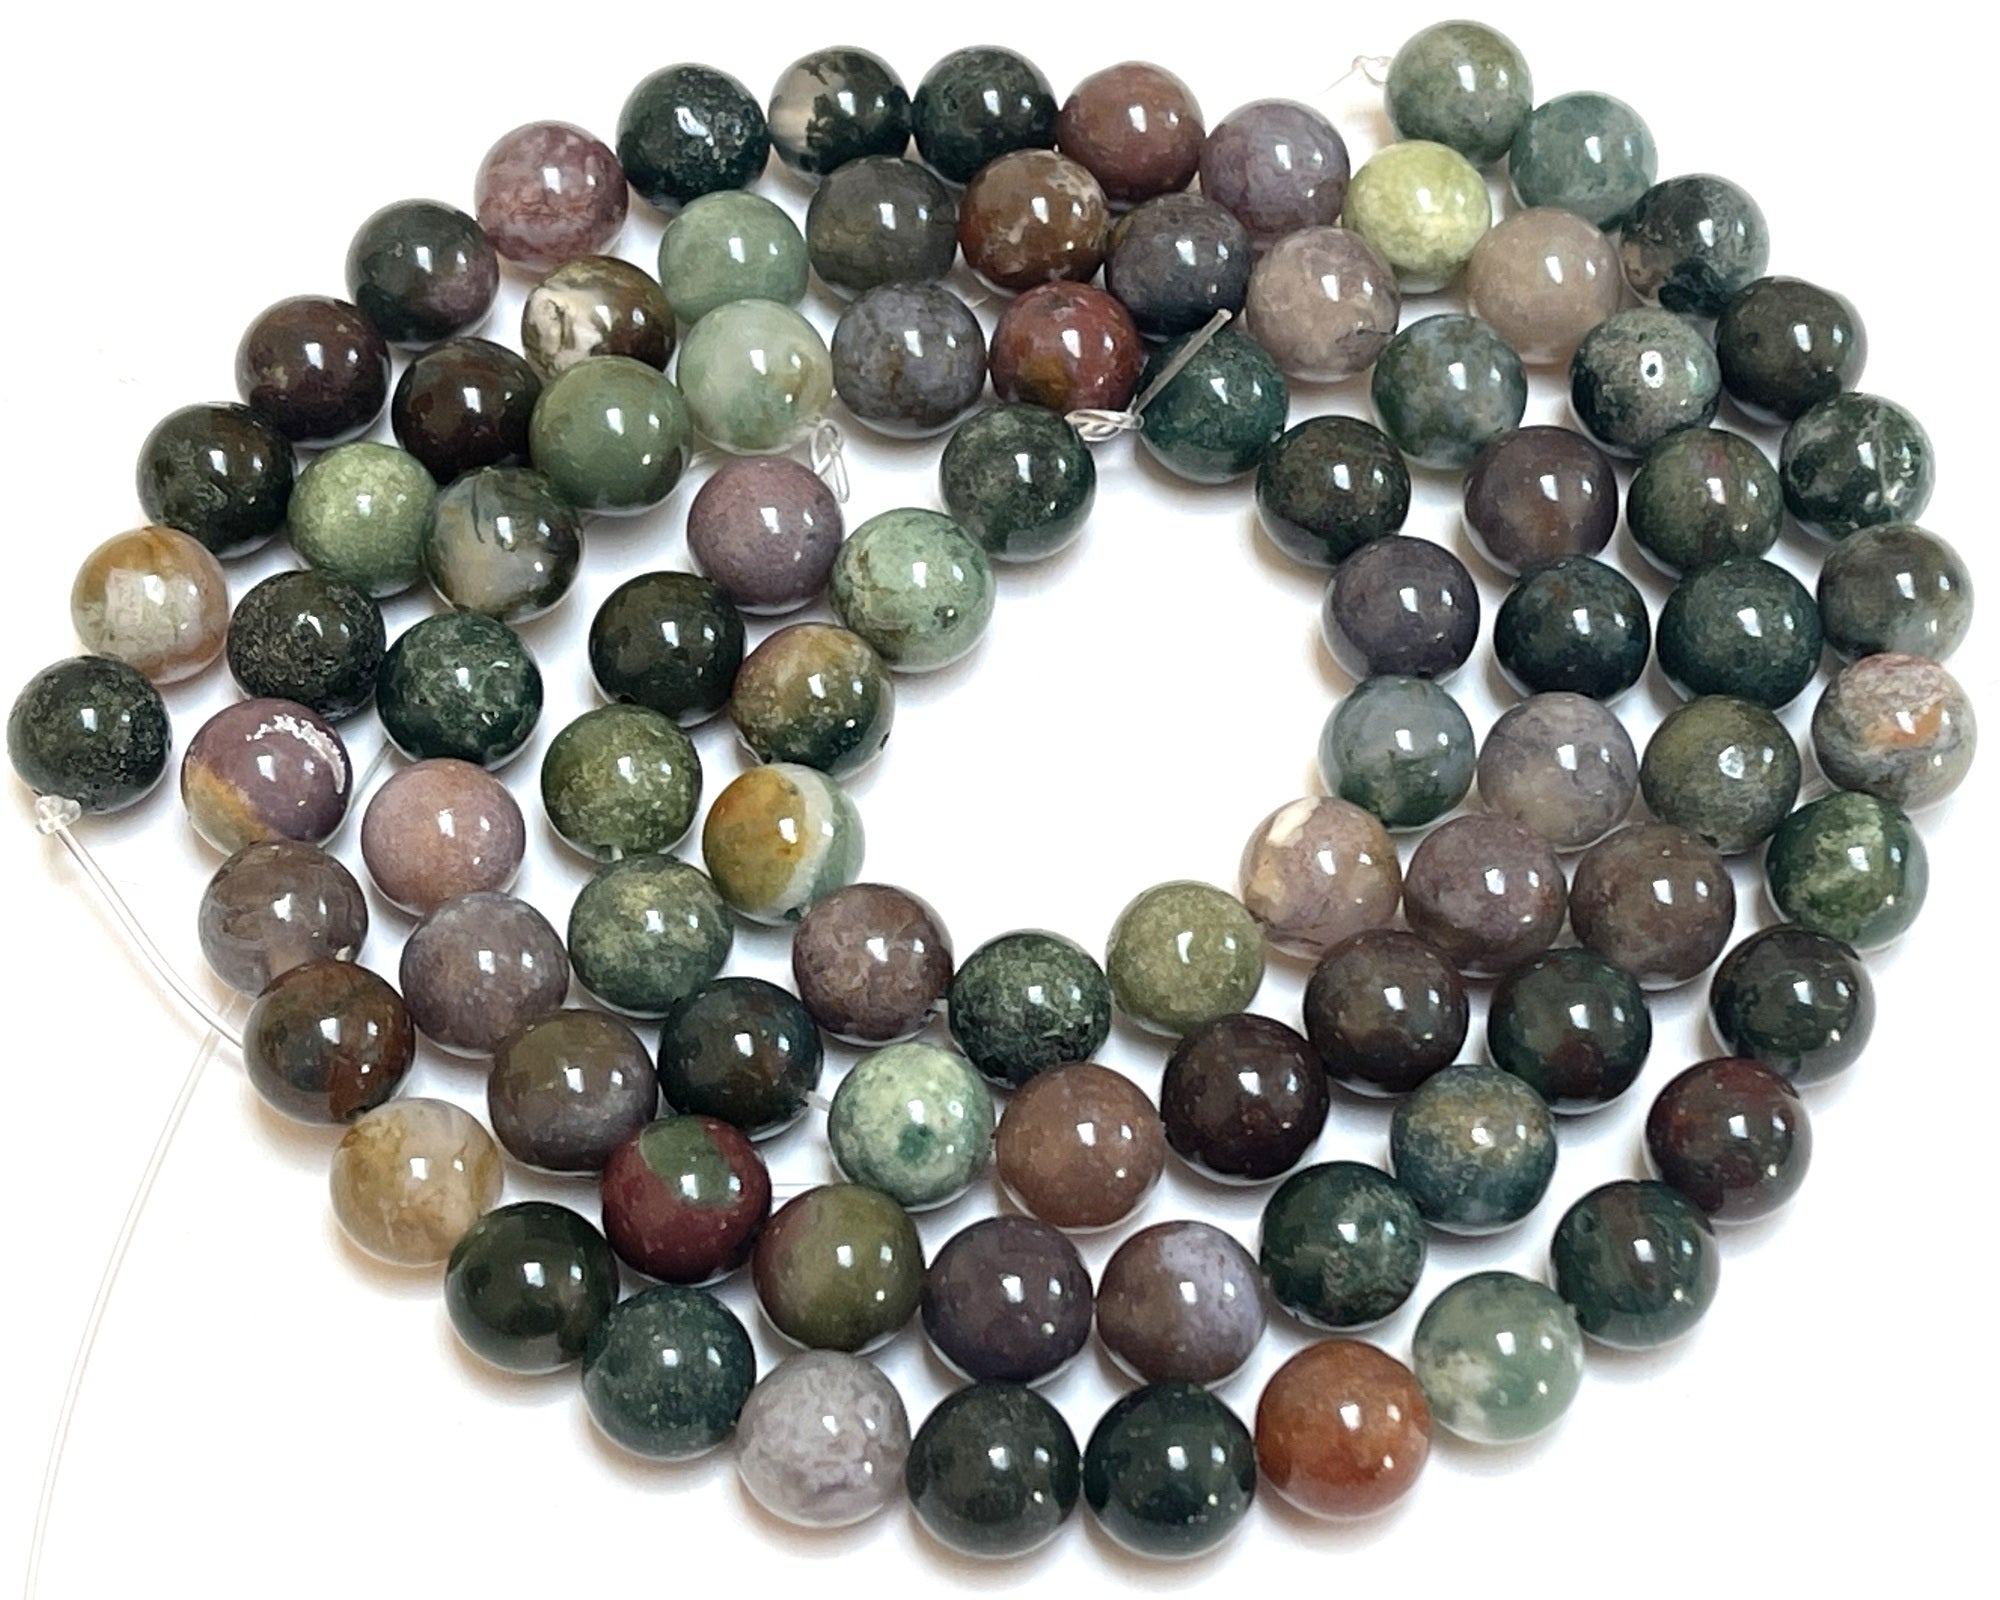 Indian Agate 8mm round natural gemstone beads 15" strand